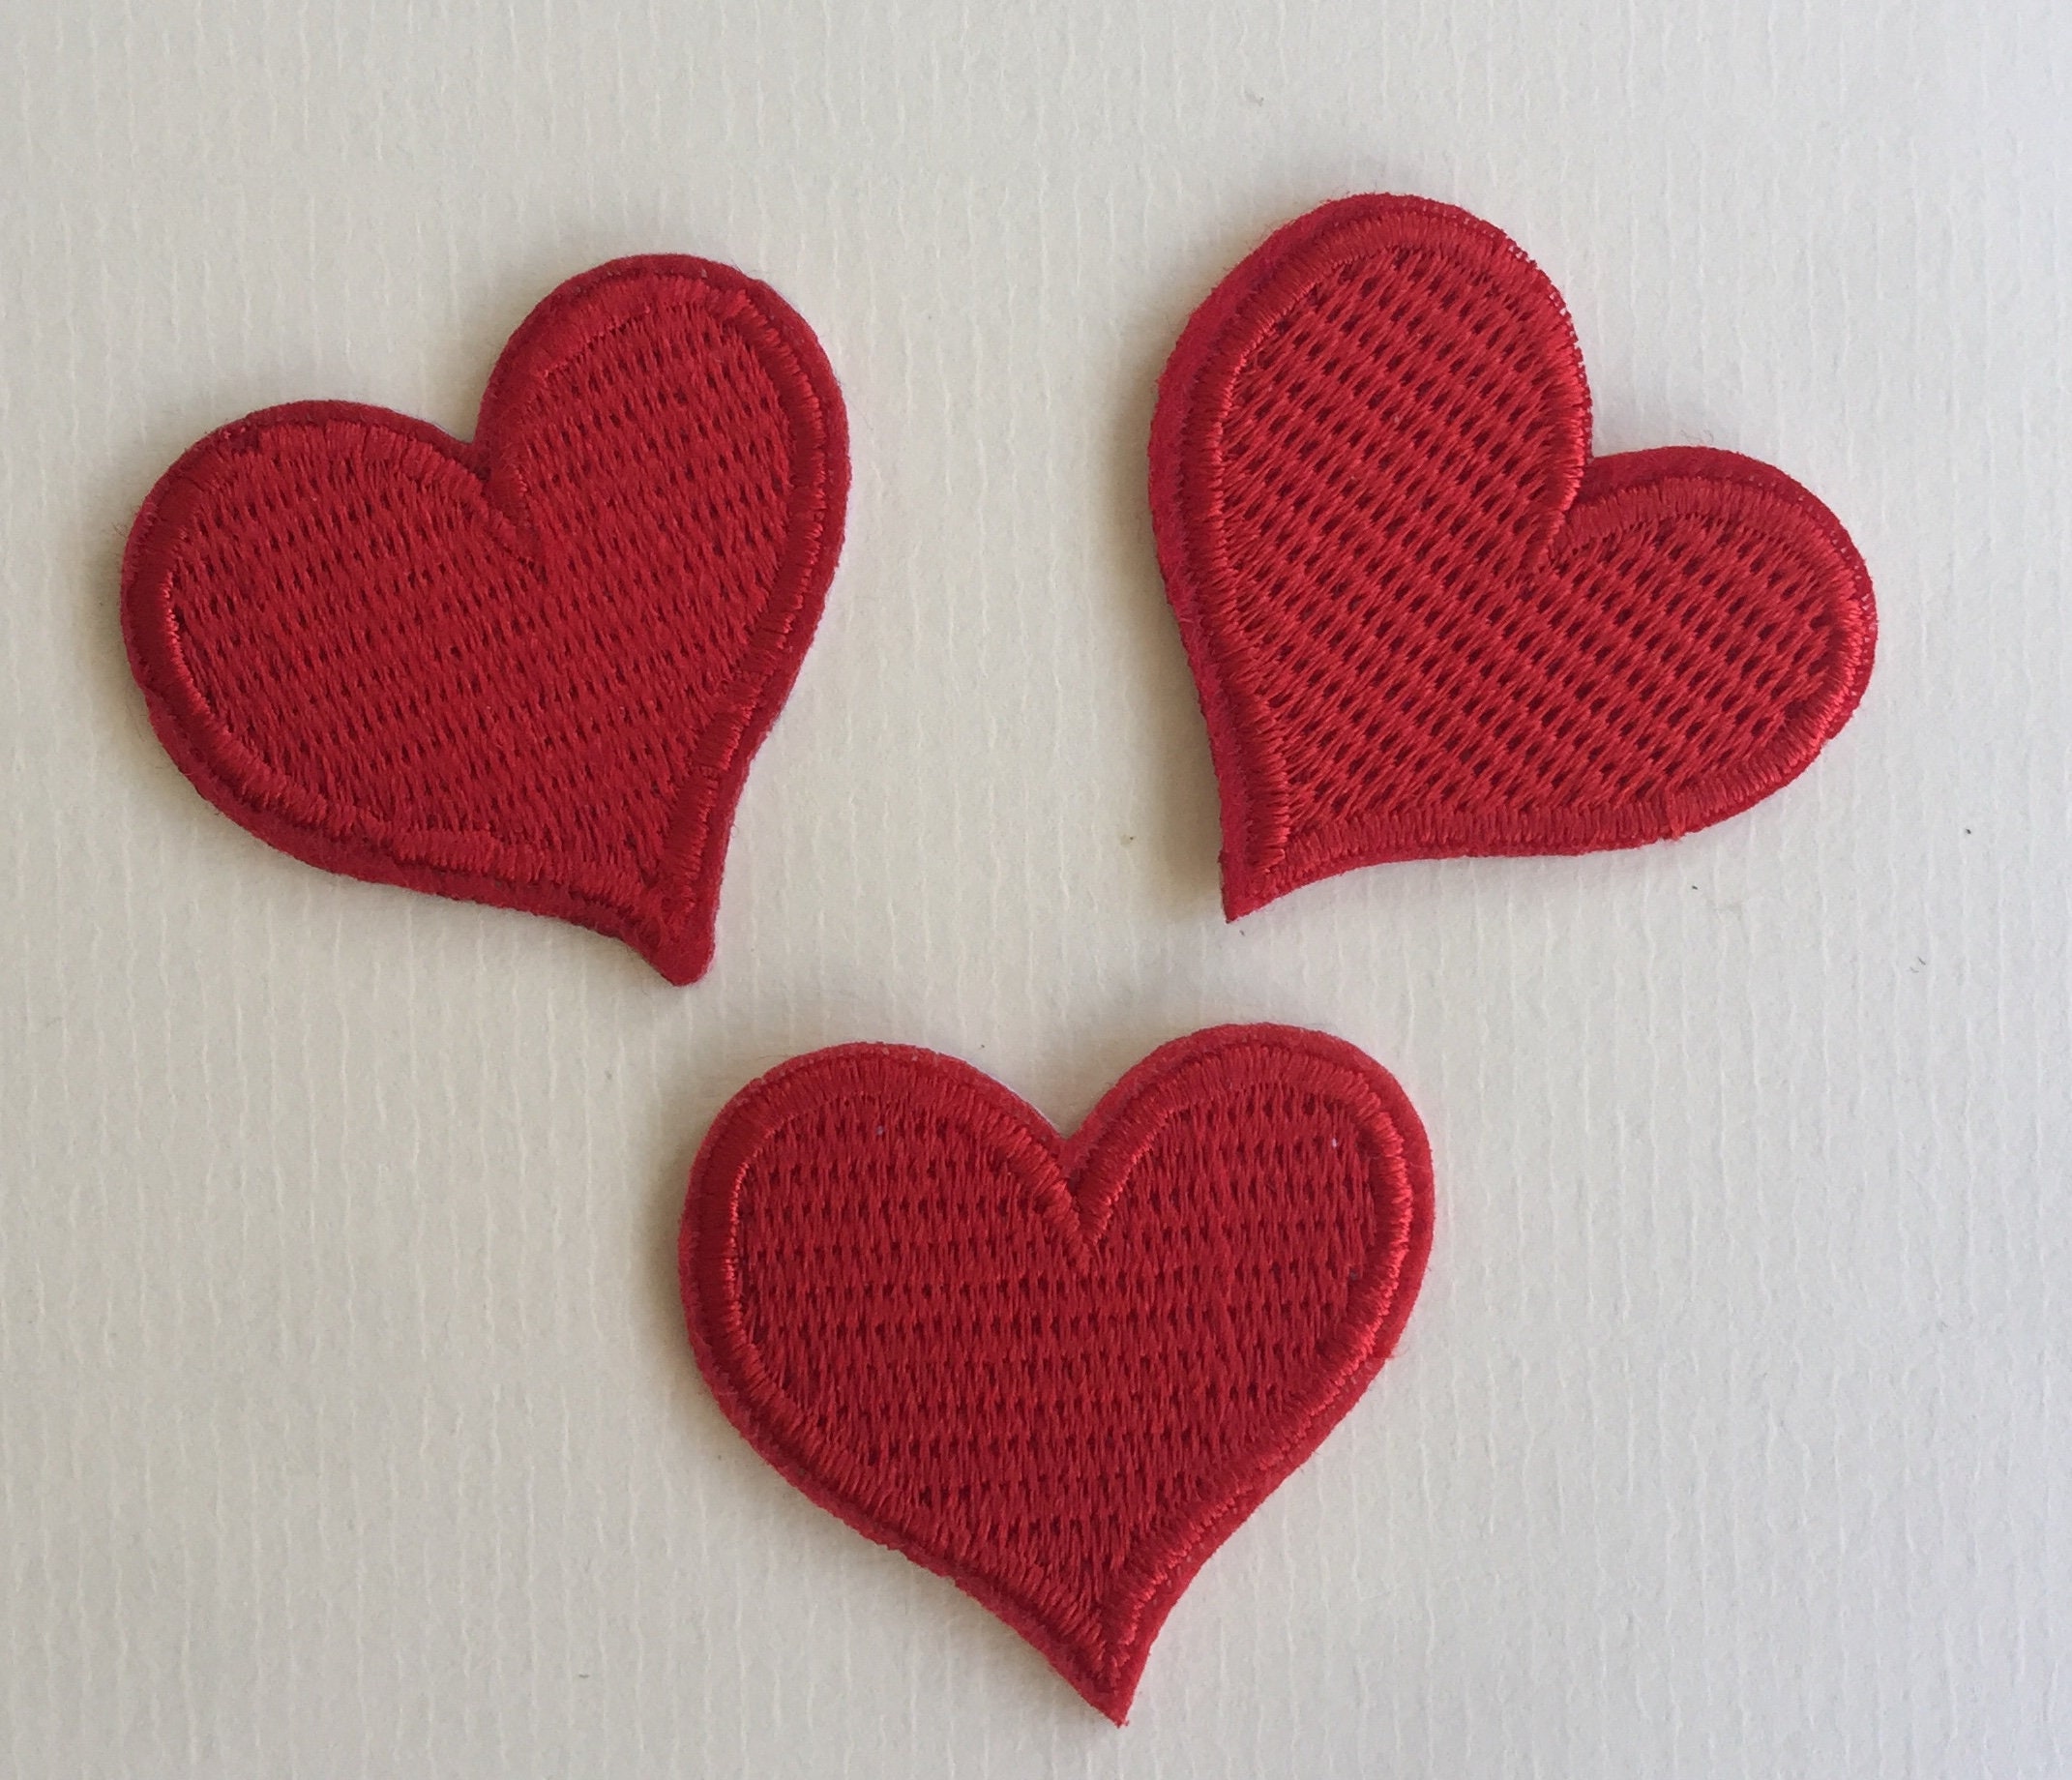 Zlettery 24pcs Red Heart Iron on Patches, Heart Embroidered Patches for Clothing, Jackets, Hats,Backpacks, Jeans